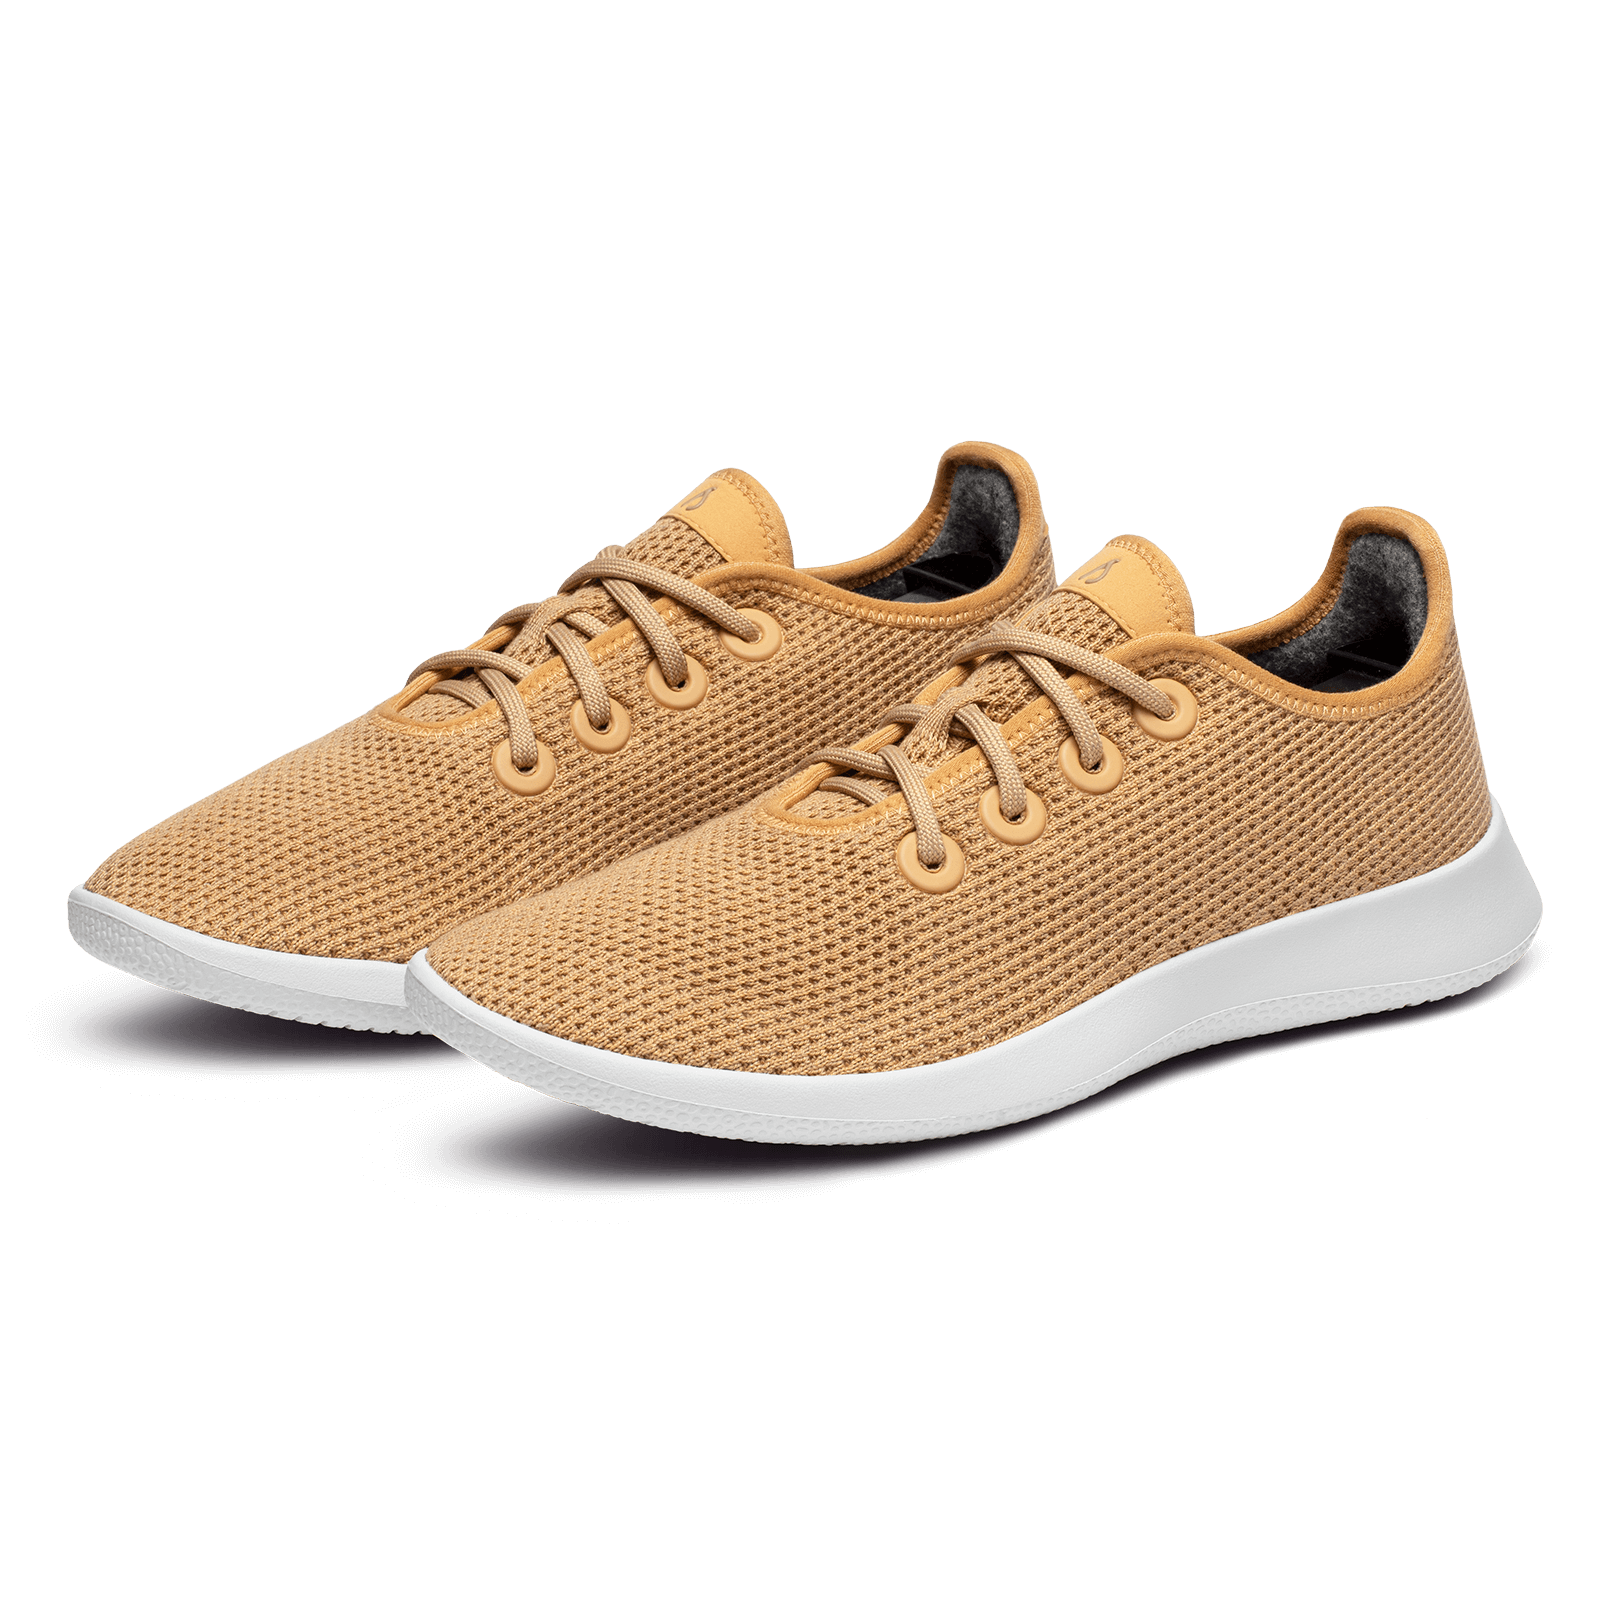 Men's Tree Runners - Forage Tan (Blizzard Sole)